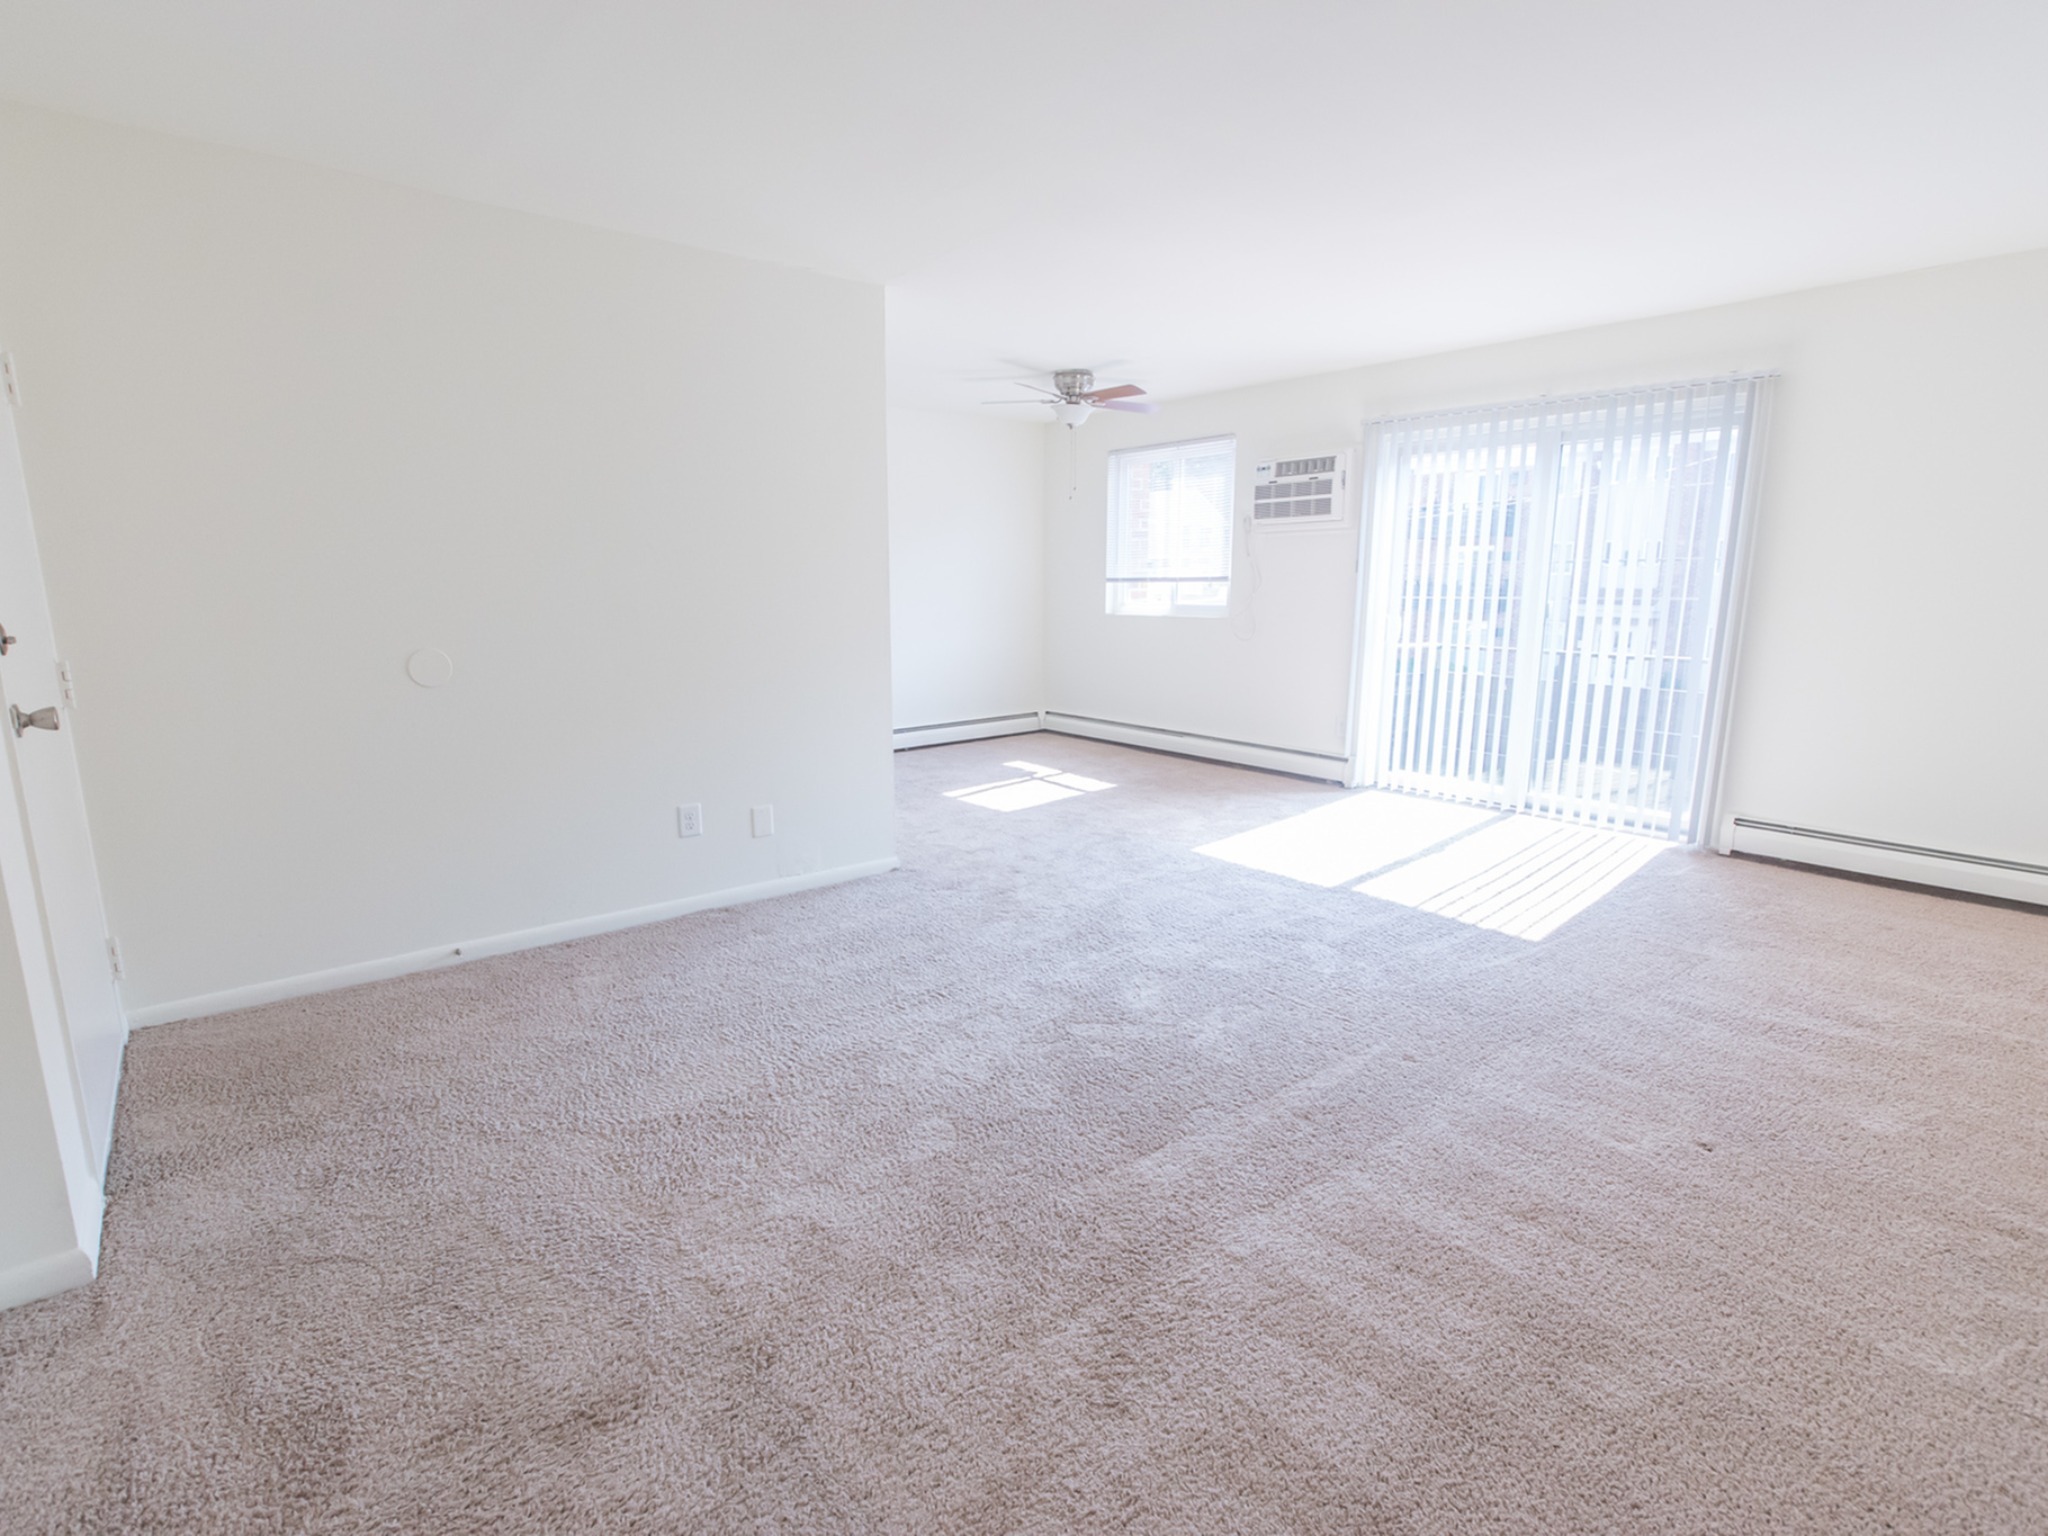 The living room area of an apartment unfurnished, fitted with carpet flooring, and a sliding door